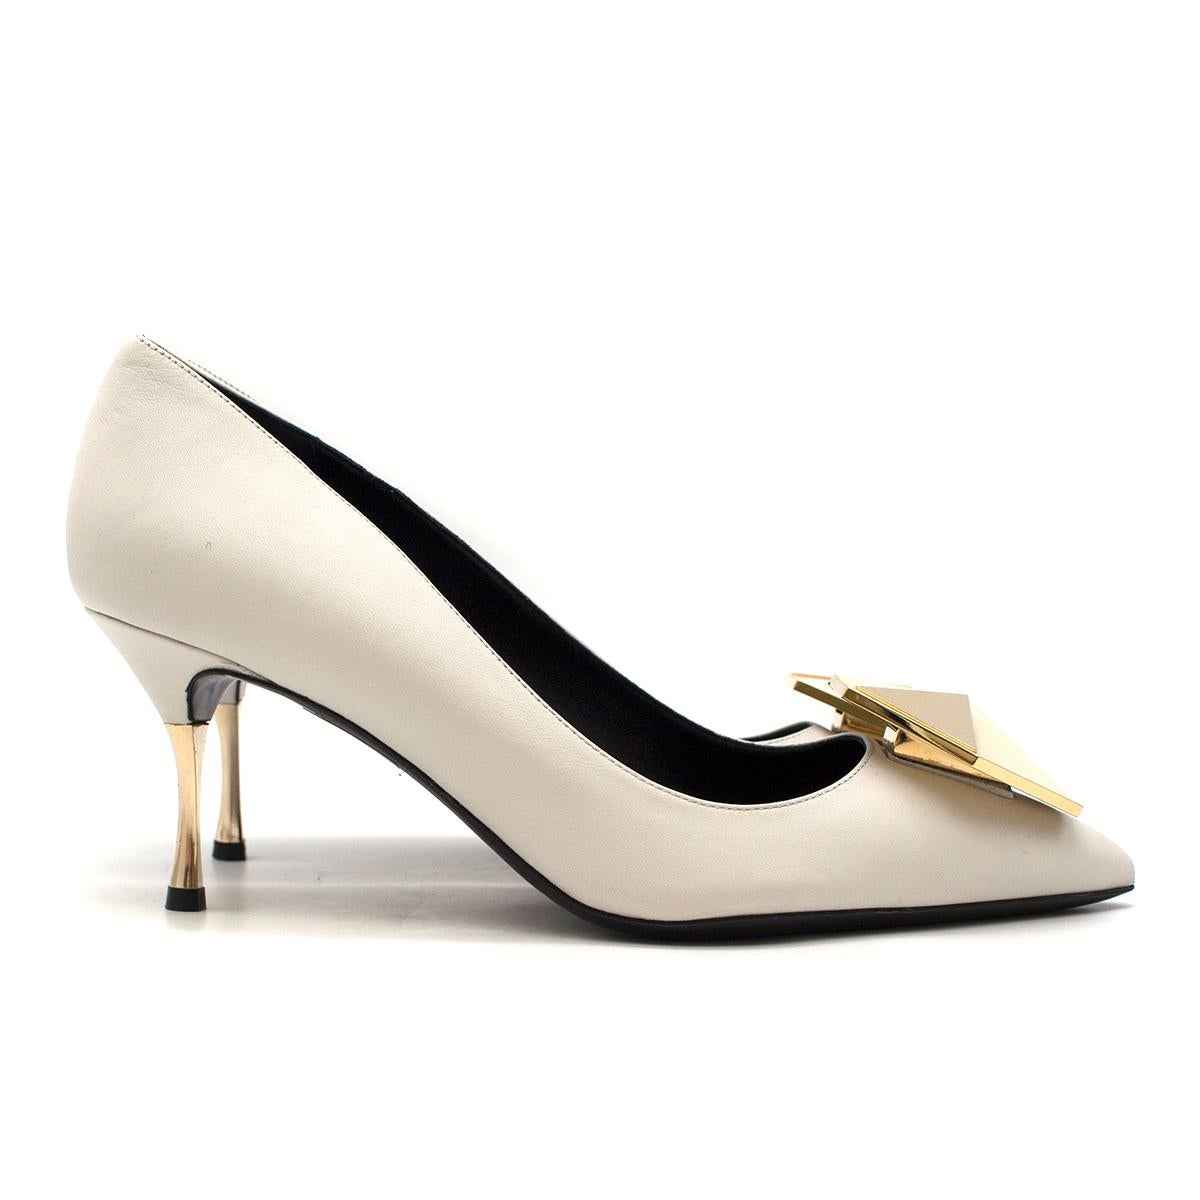 Nicholas Kirkwood White Leather Embellished Pumps

- White leather pumps
- Pointy toe
- Embellished with golden polygon detail in golden tone
- Stiletto heel in gold tone
- Leather black insole
- Leather black sole

This item comes with the original